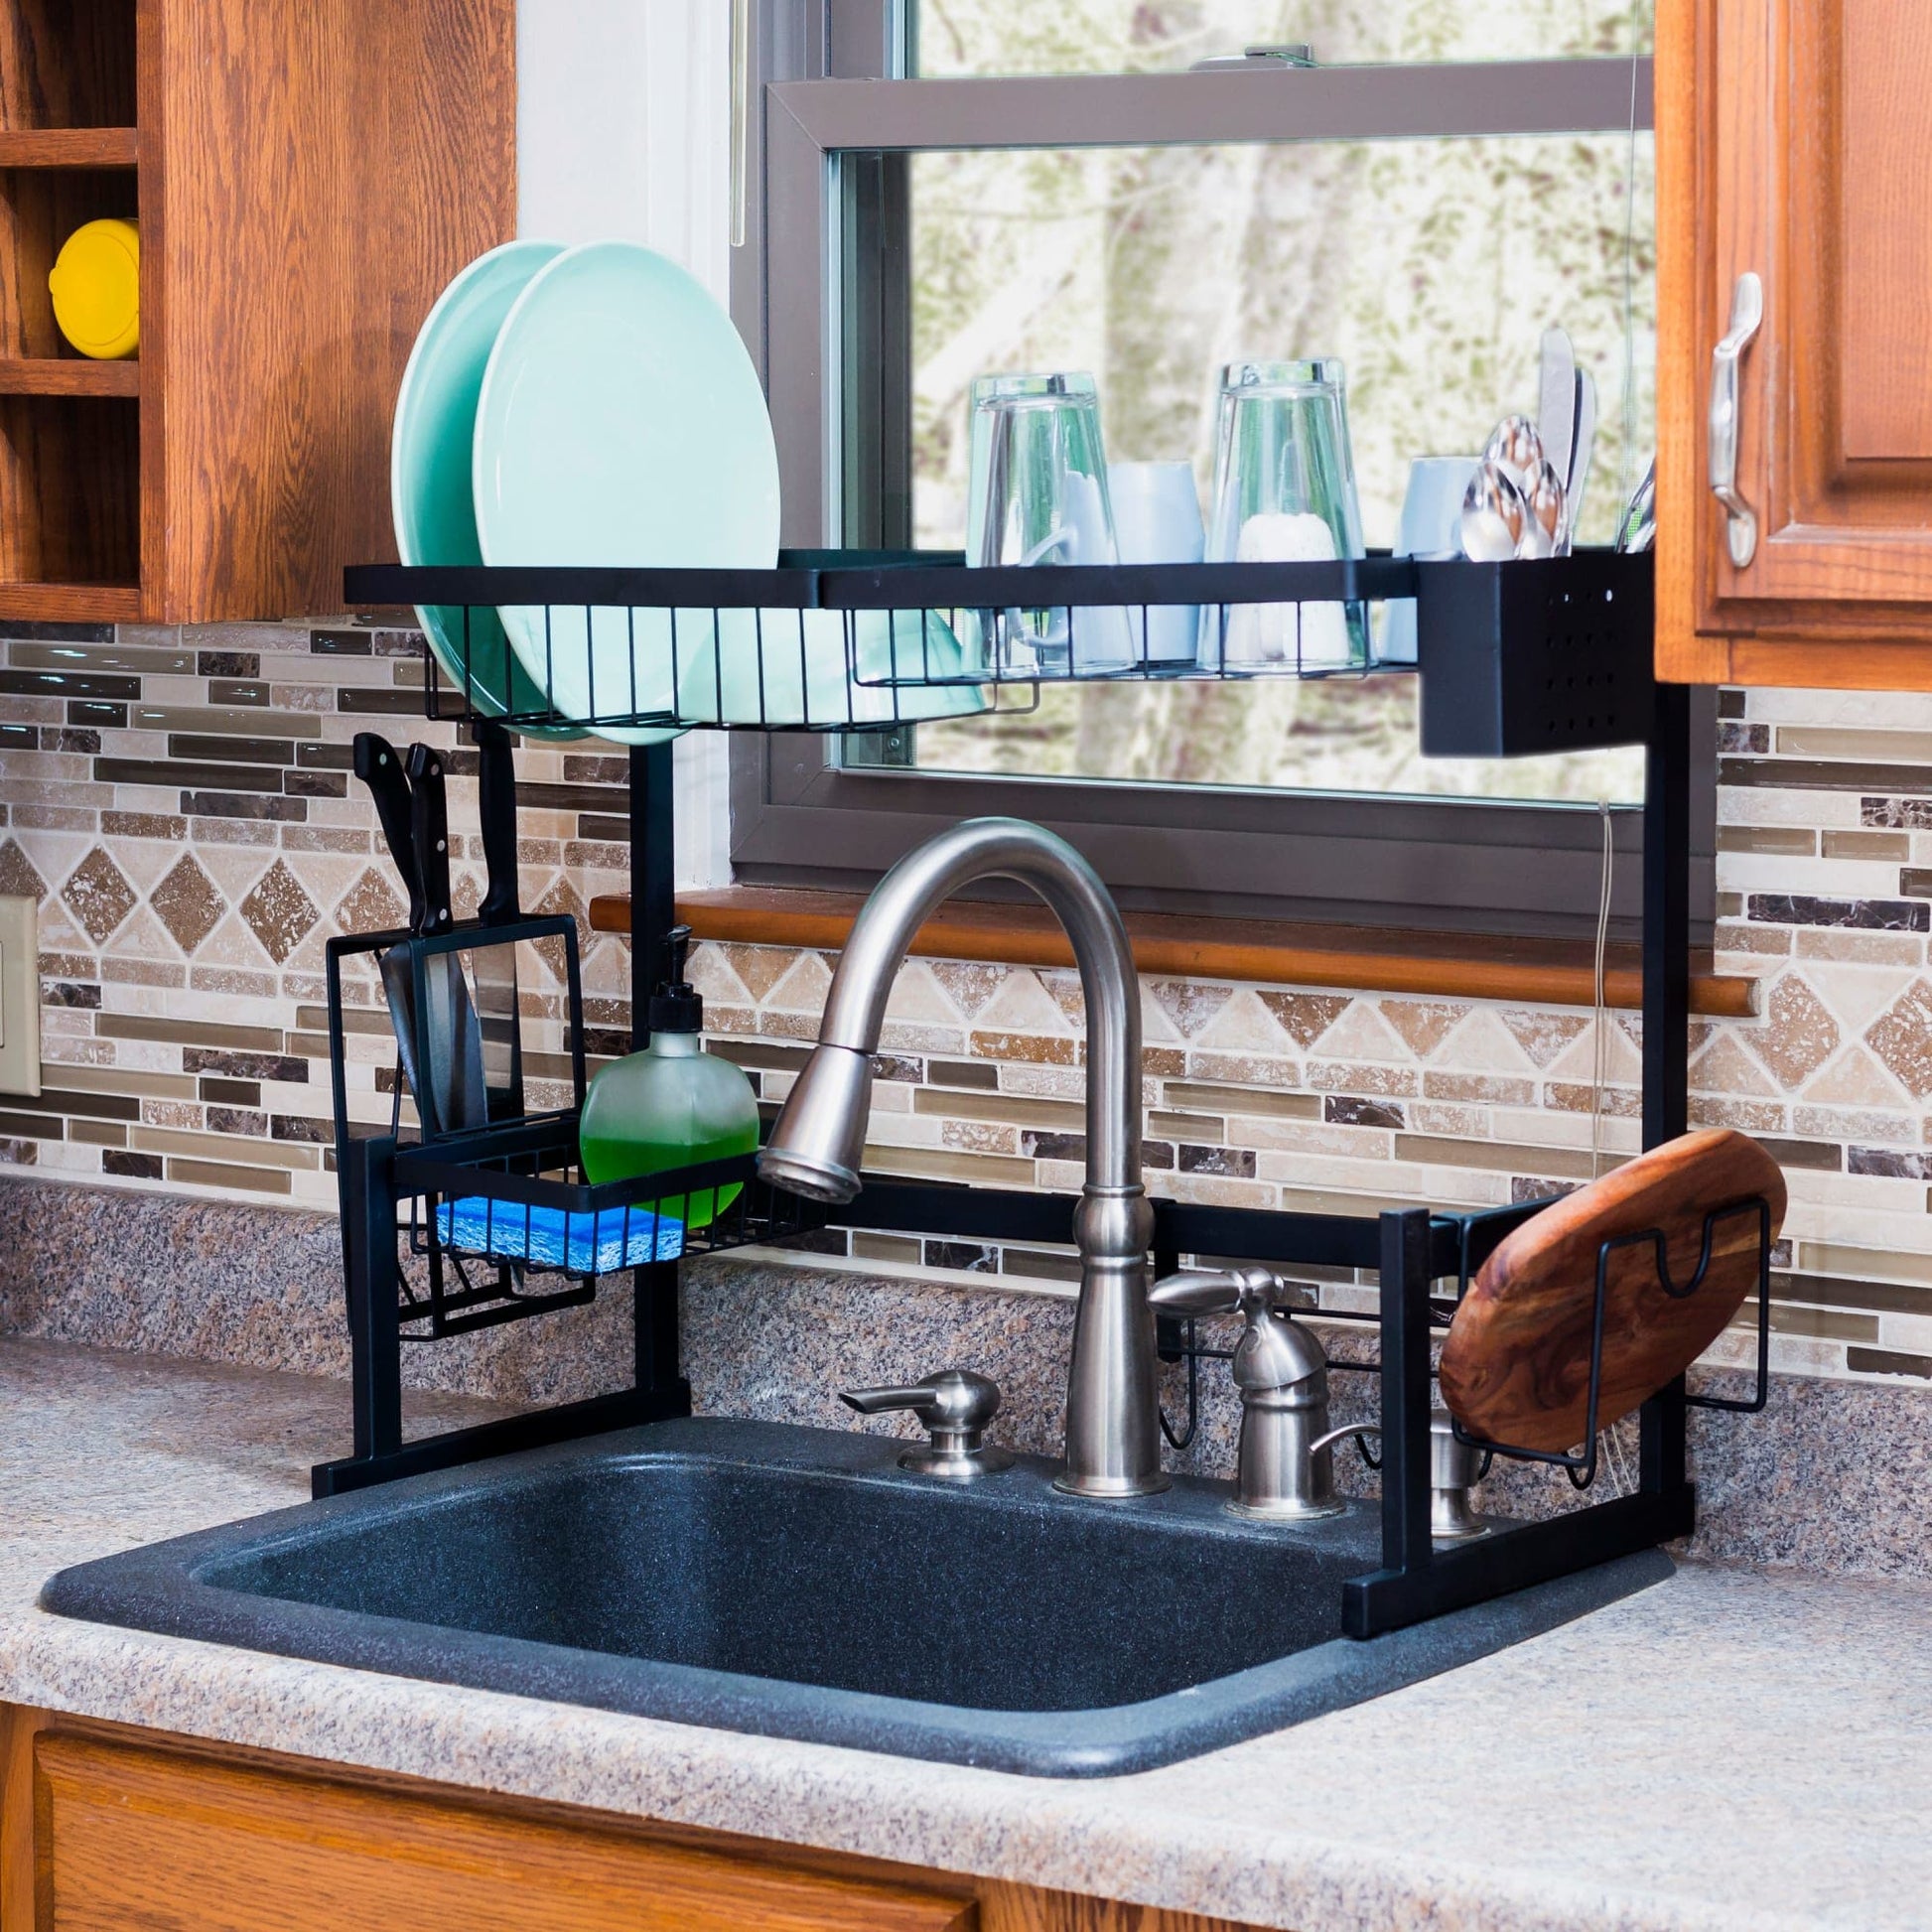  Home Basics Over Sink Shelf, (Chrome) Steel Over The Kitchen  Sink Organizer for Soap, Sponges, Scrubbers, and More